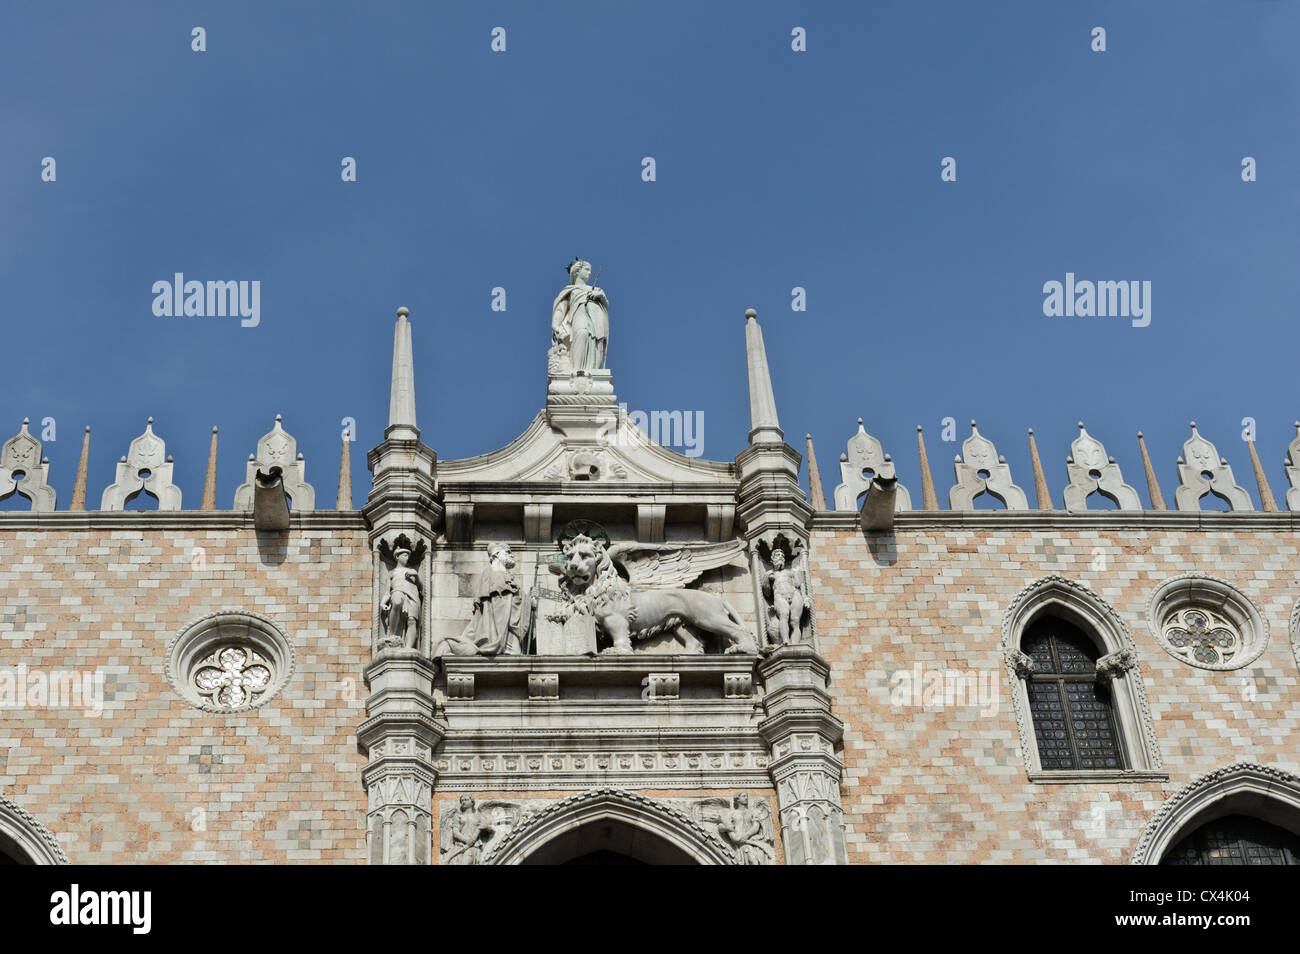 Statues on Doge's Palace, St Mark's Square, Venice, Italy. Stock Photo